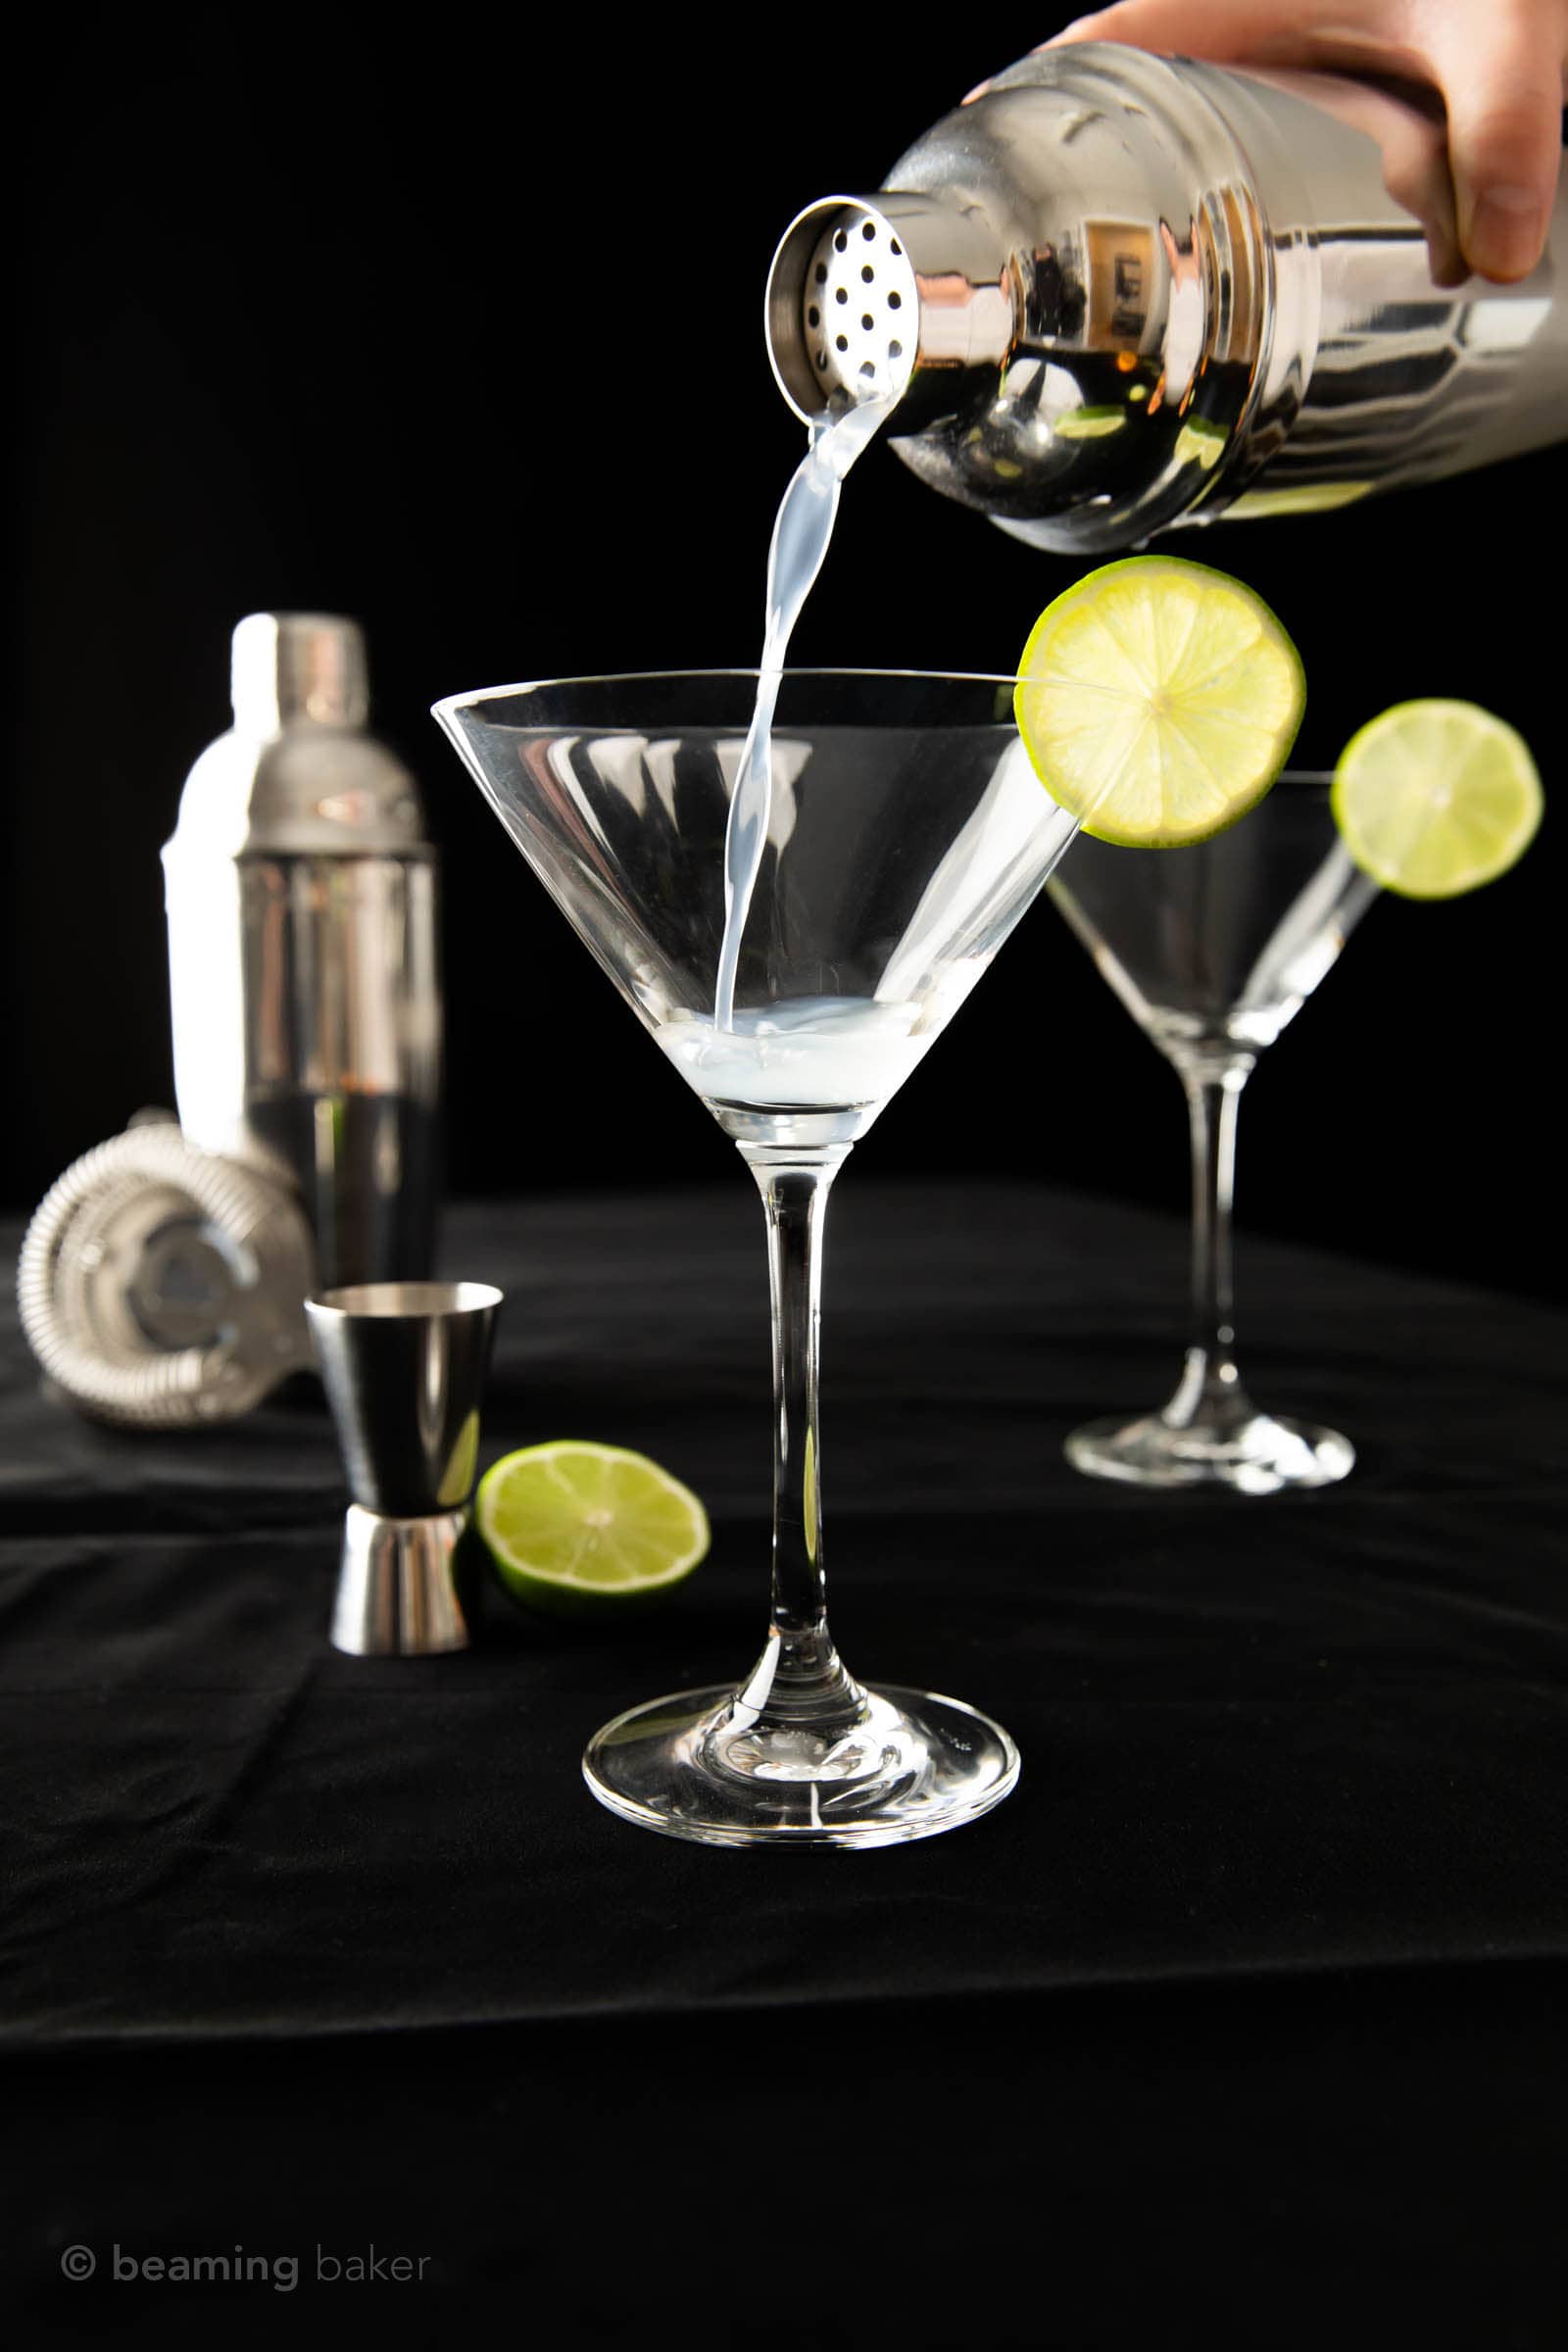 Just starting to pour gimlet into a martini glass garnished with a lime wedge